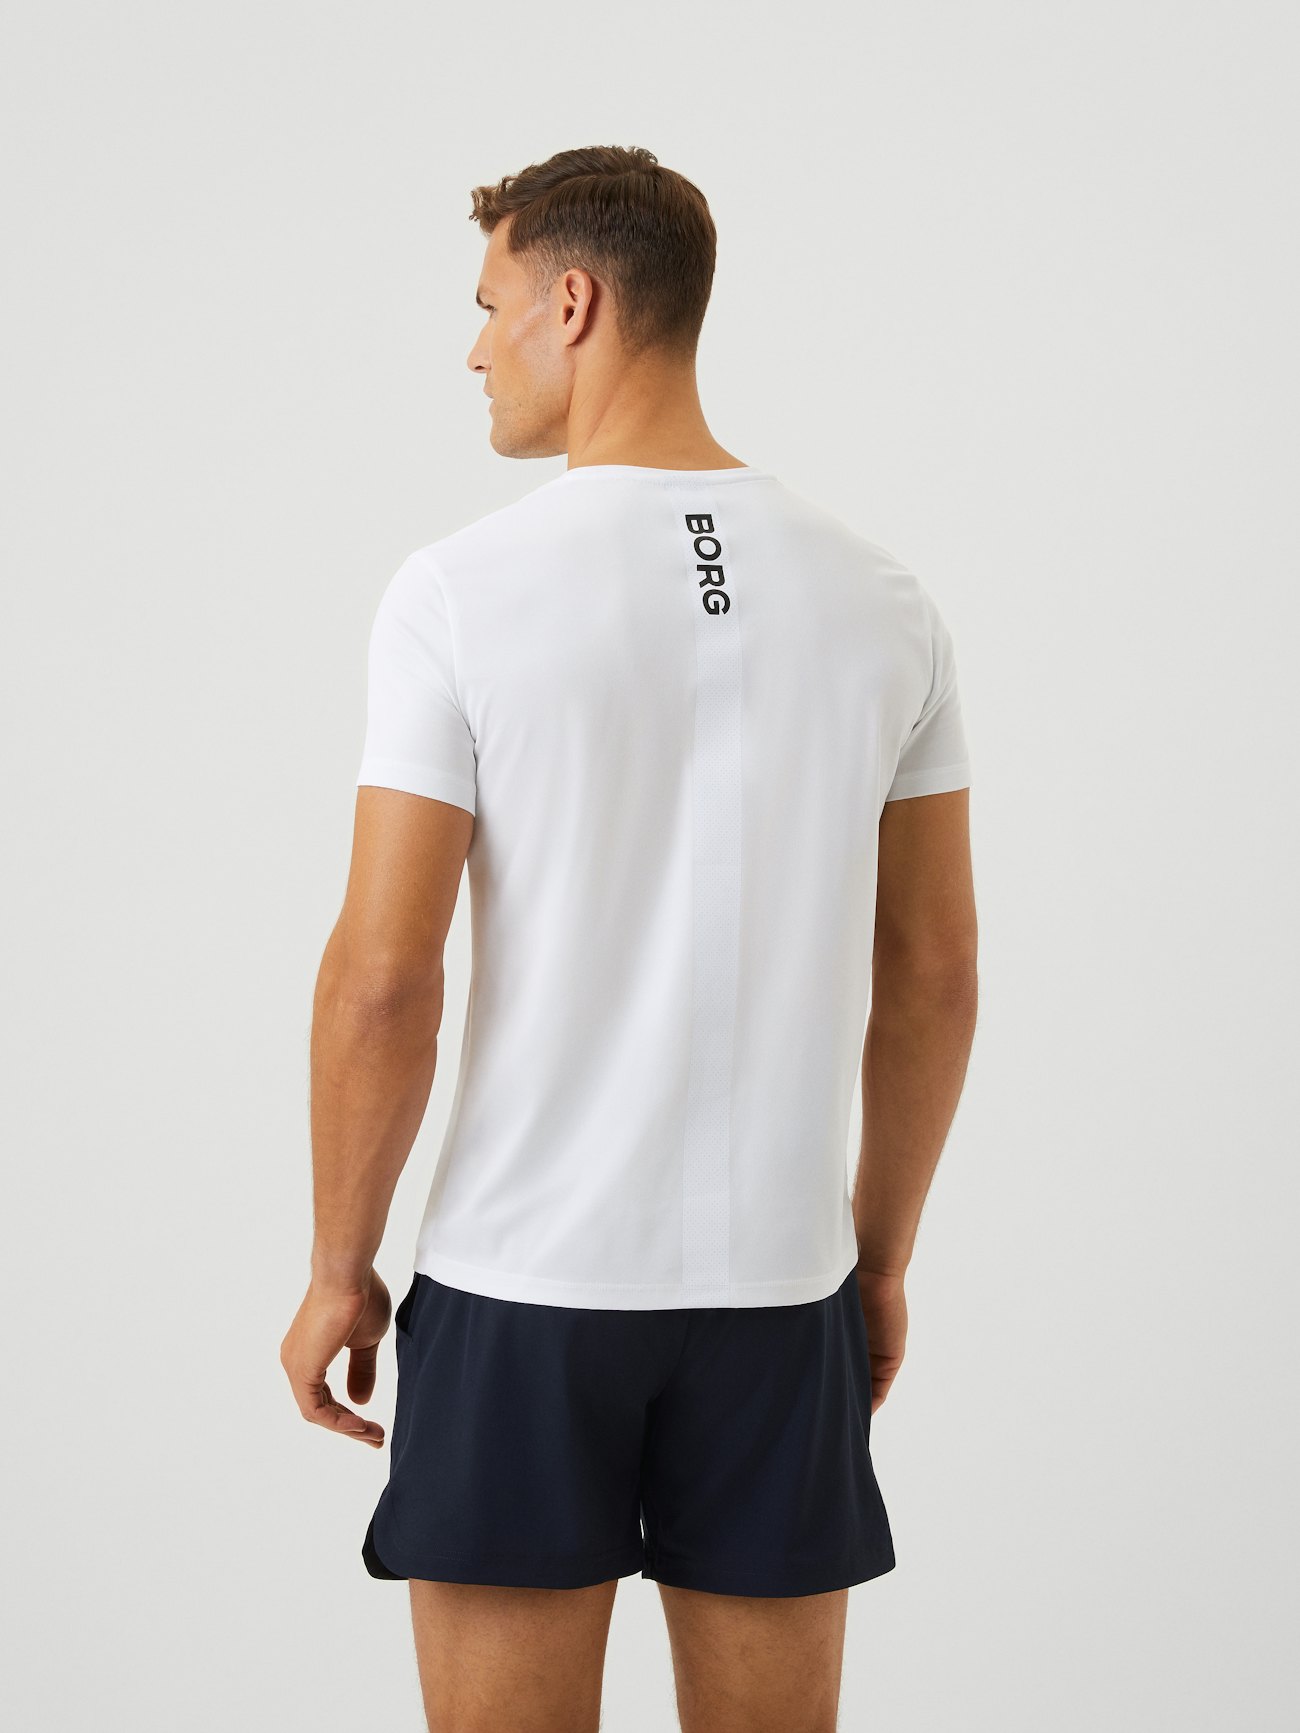 The new T-shirts pour Homme